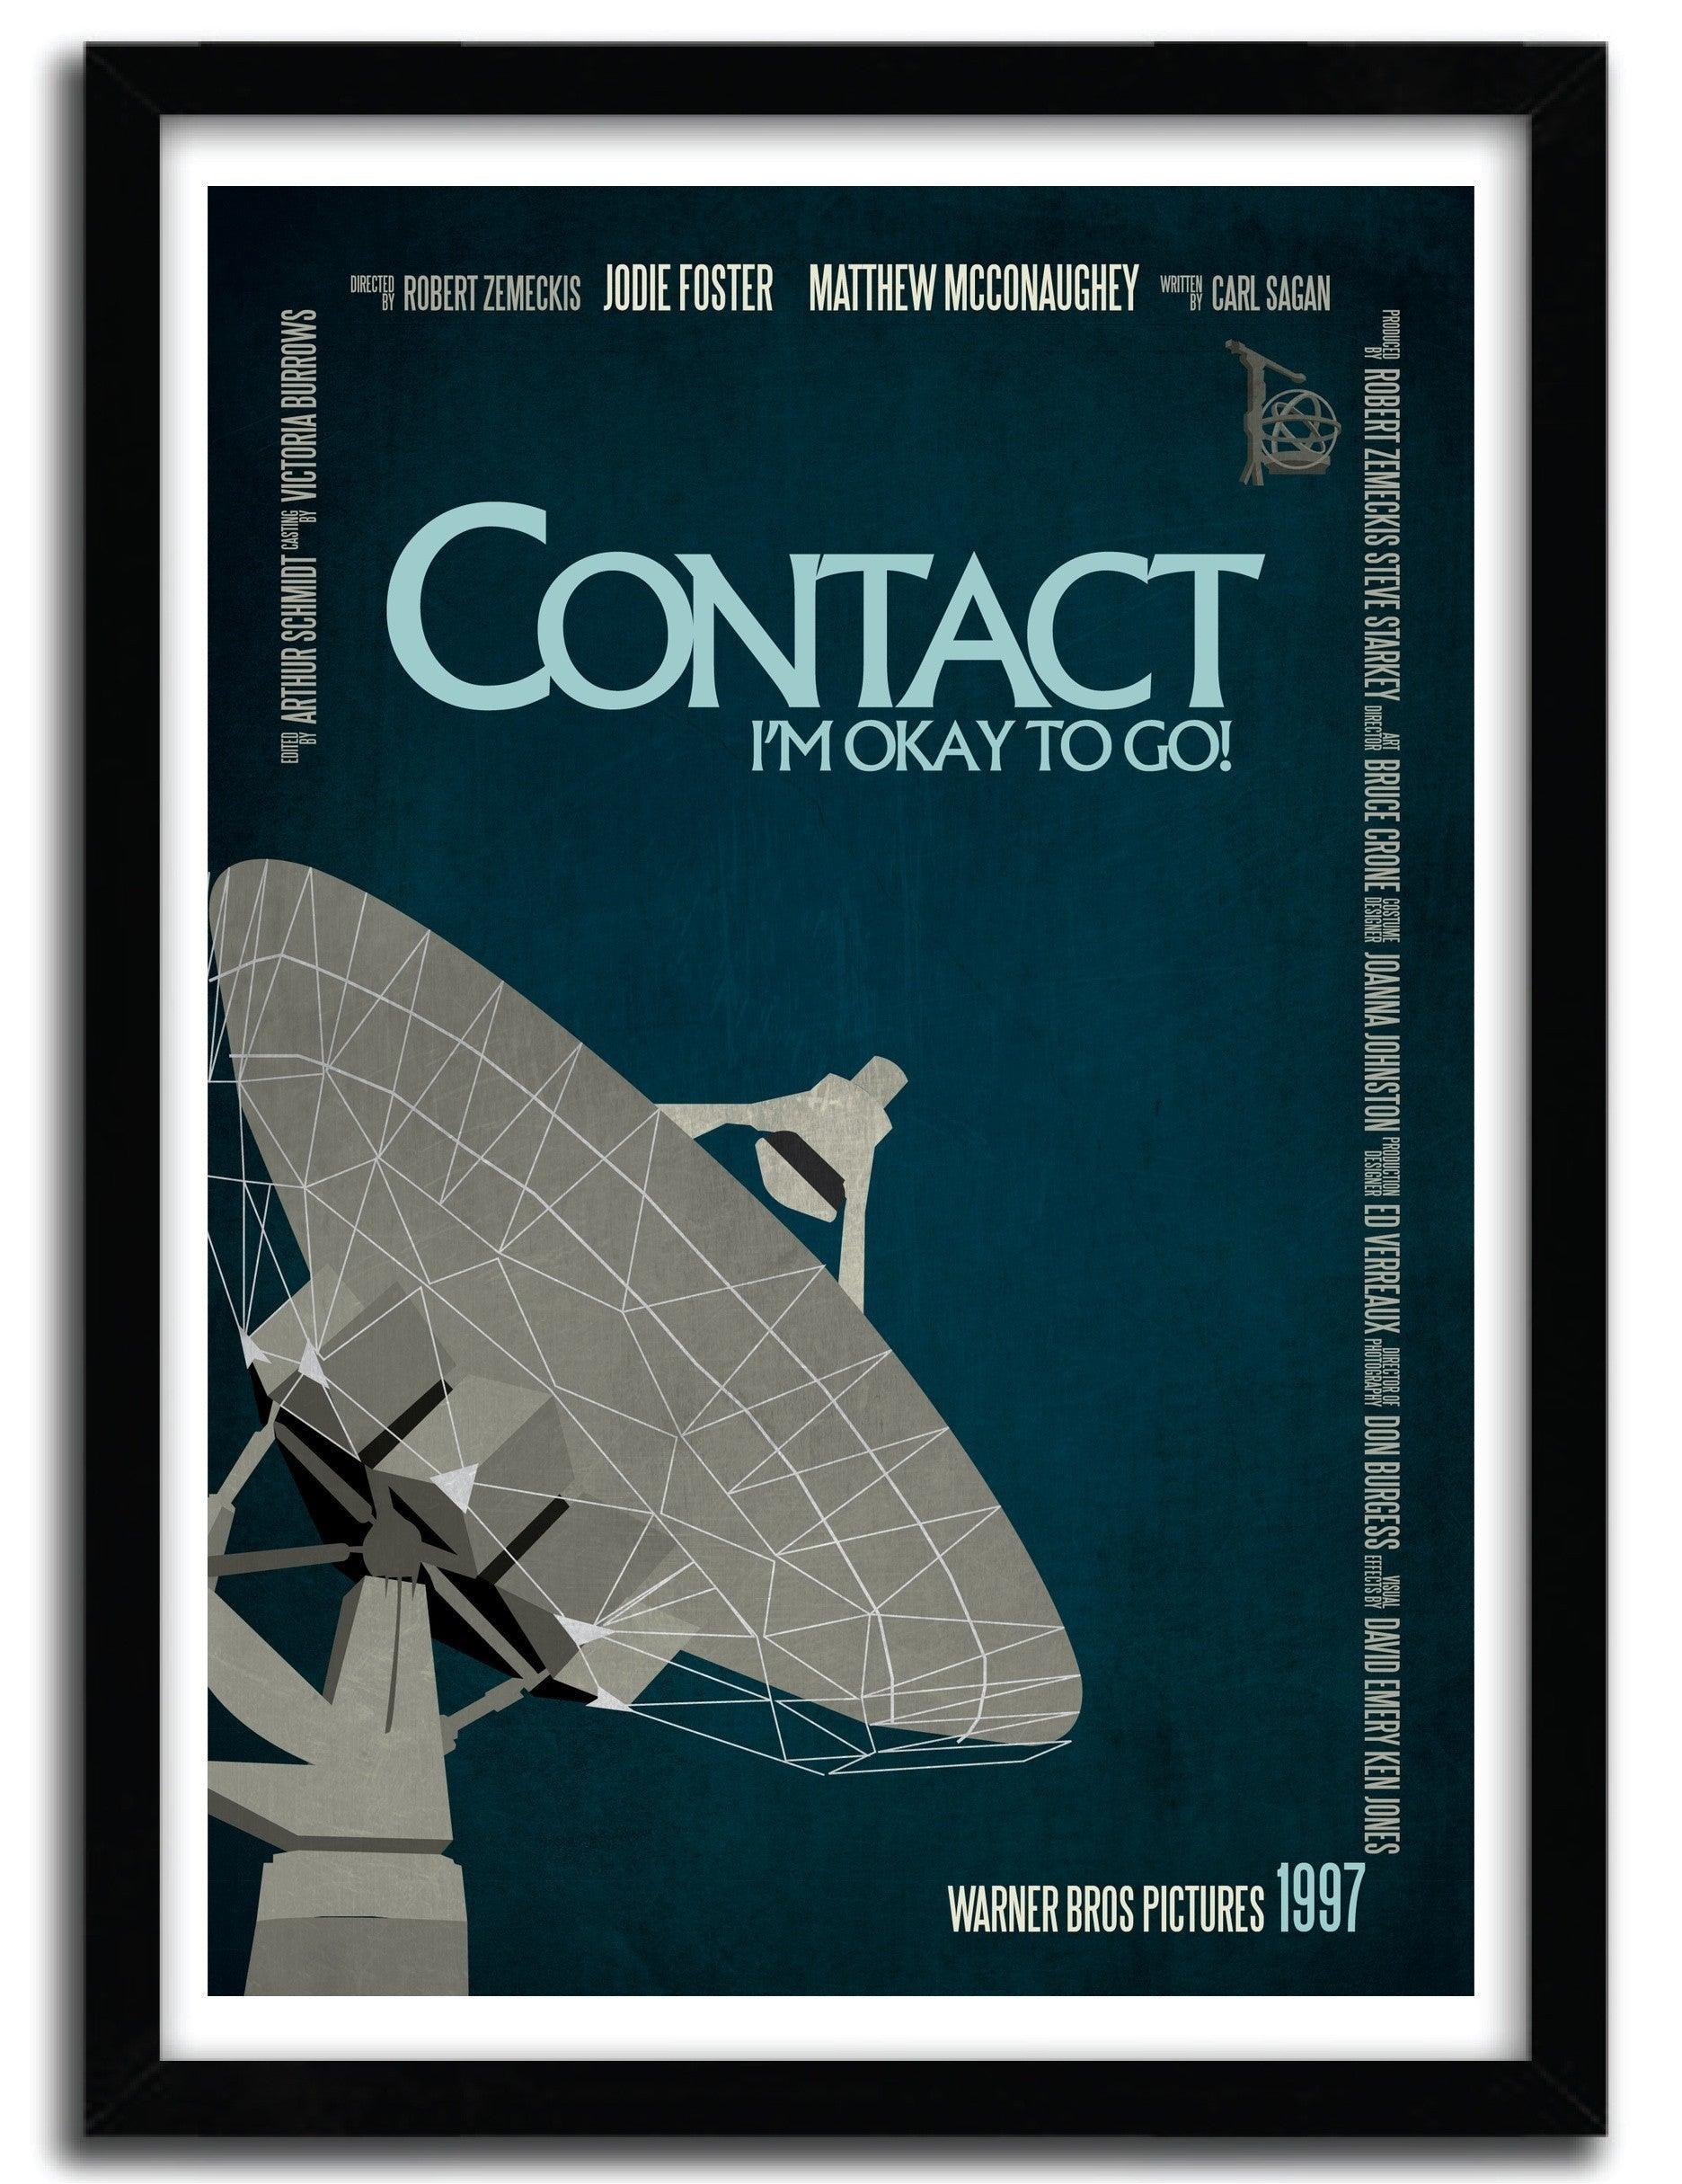 Affiche CONTACT by AYCAN YILMAZ ArtAndToys